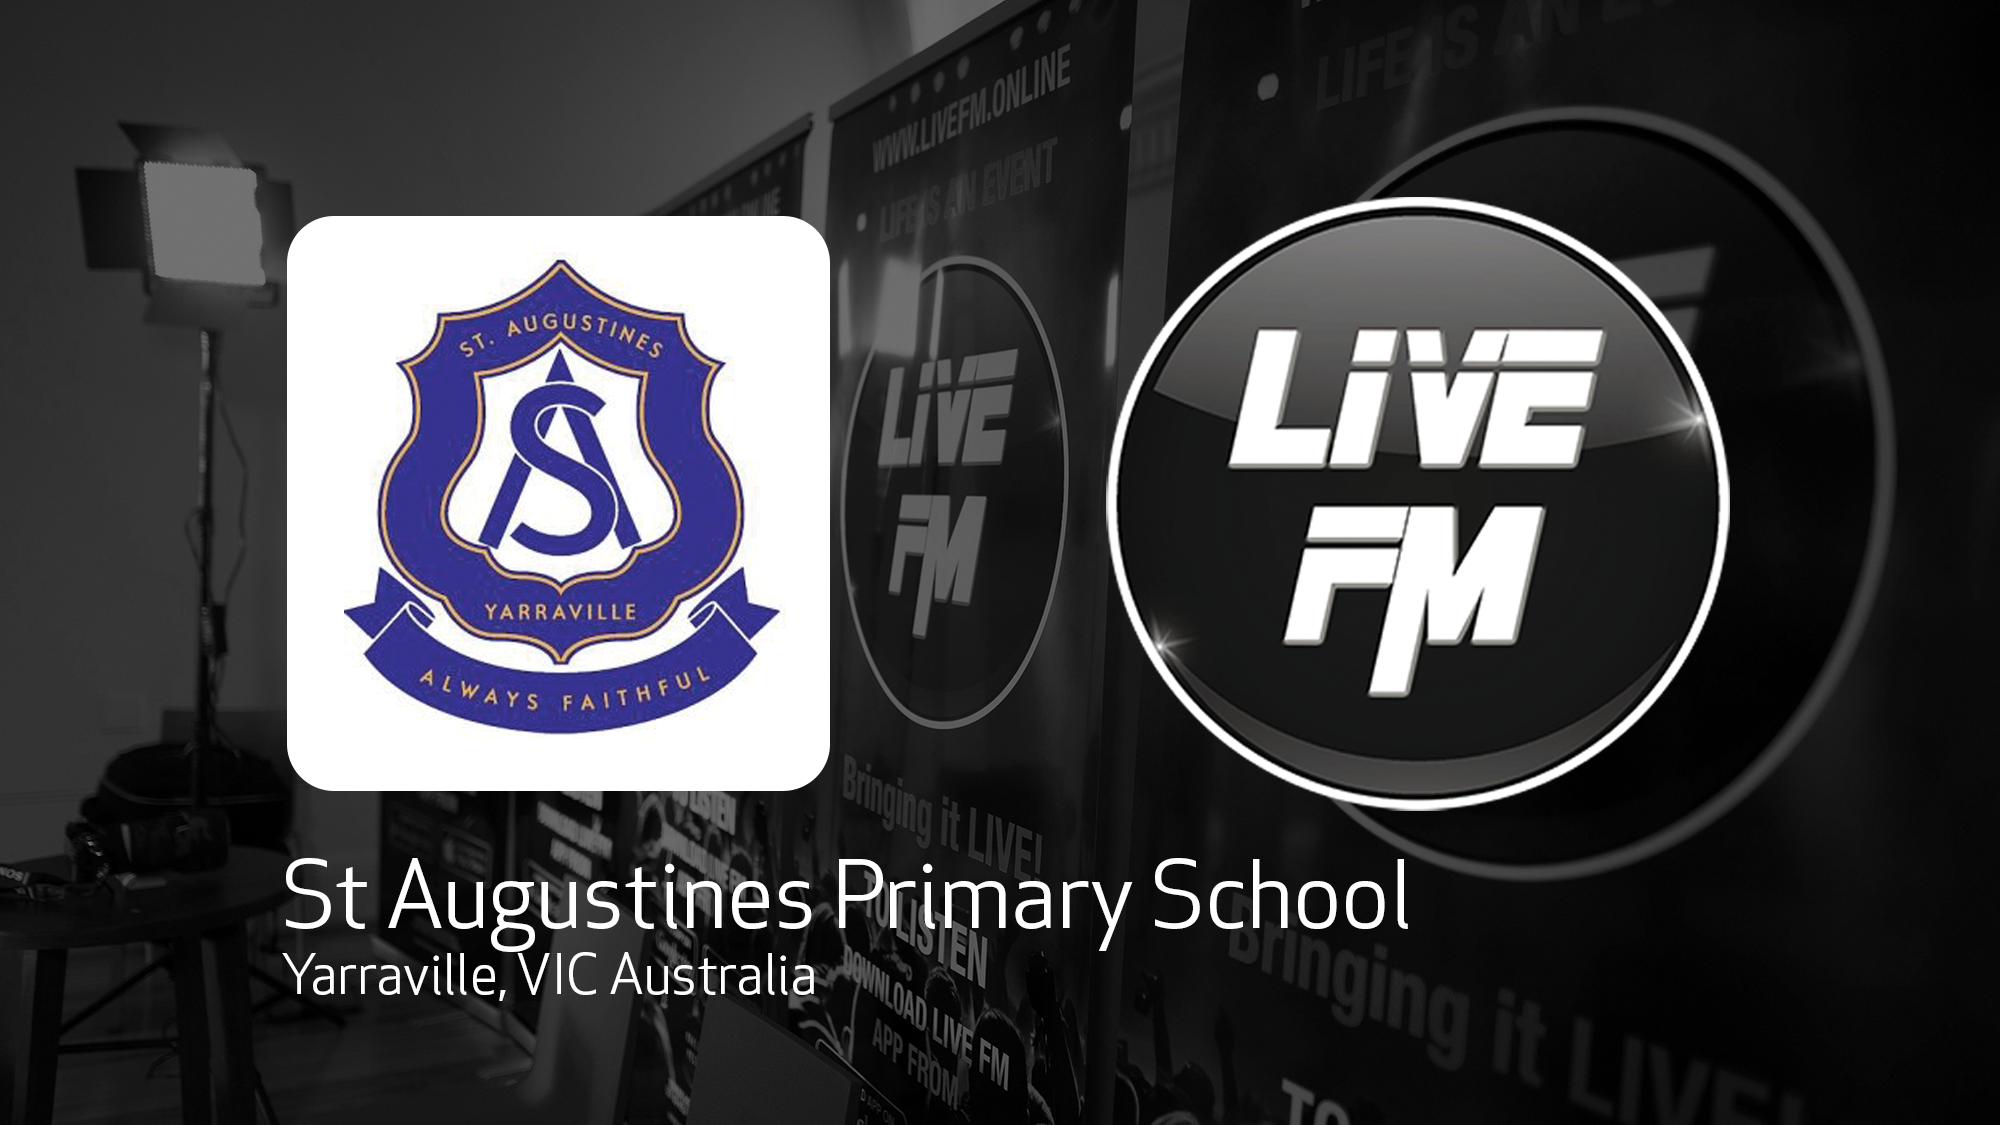 St Augustines Primary School Yarraville VIC.png